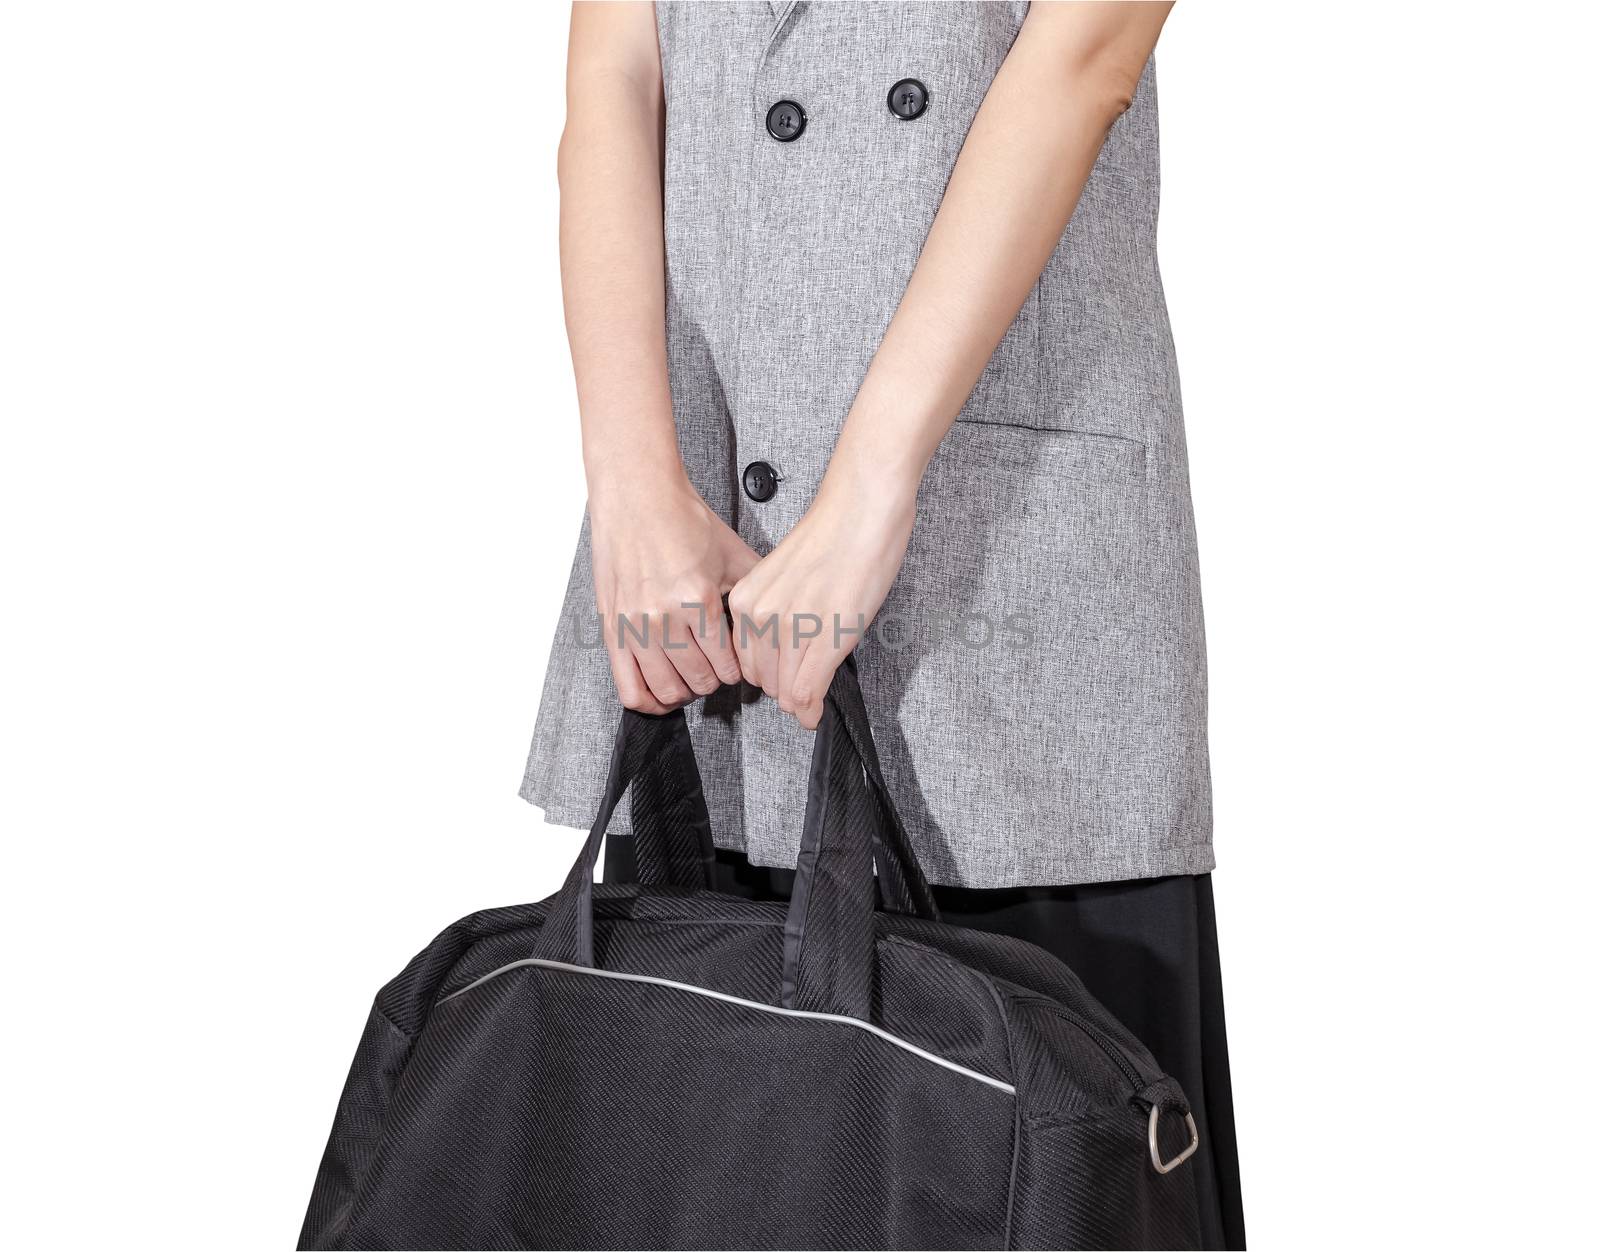 women hand hold the travel bag, black color on white background, by FrameAngel